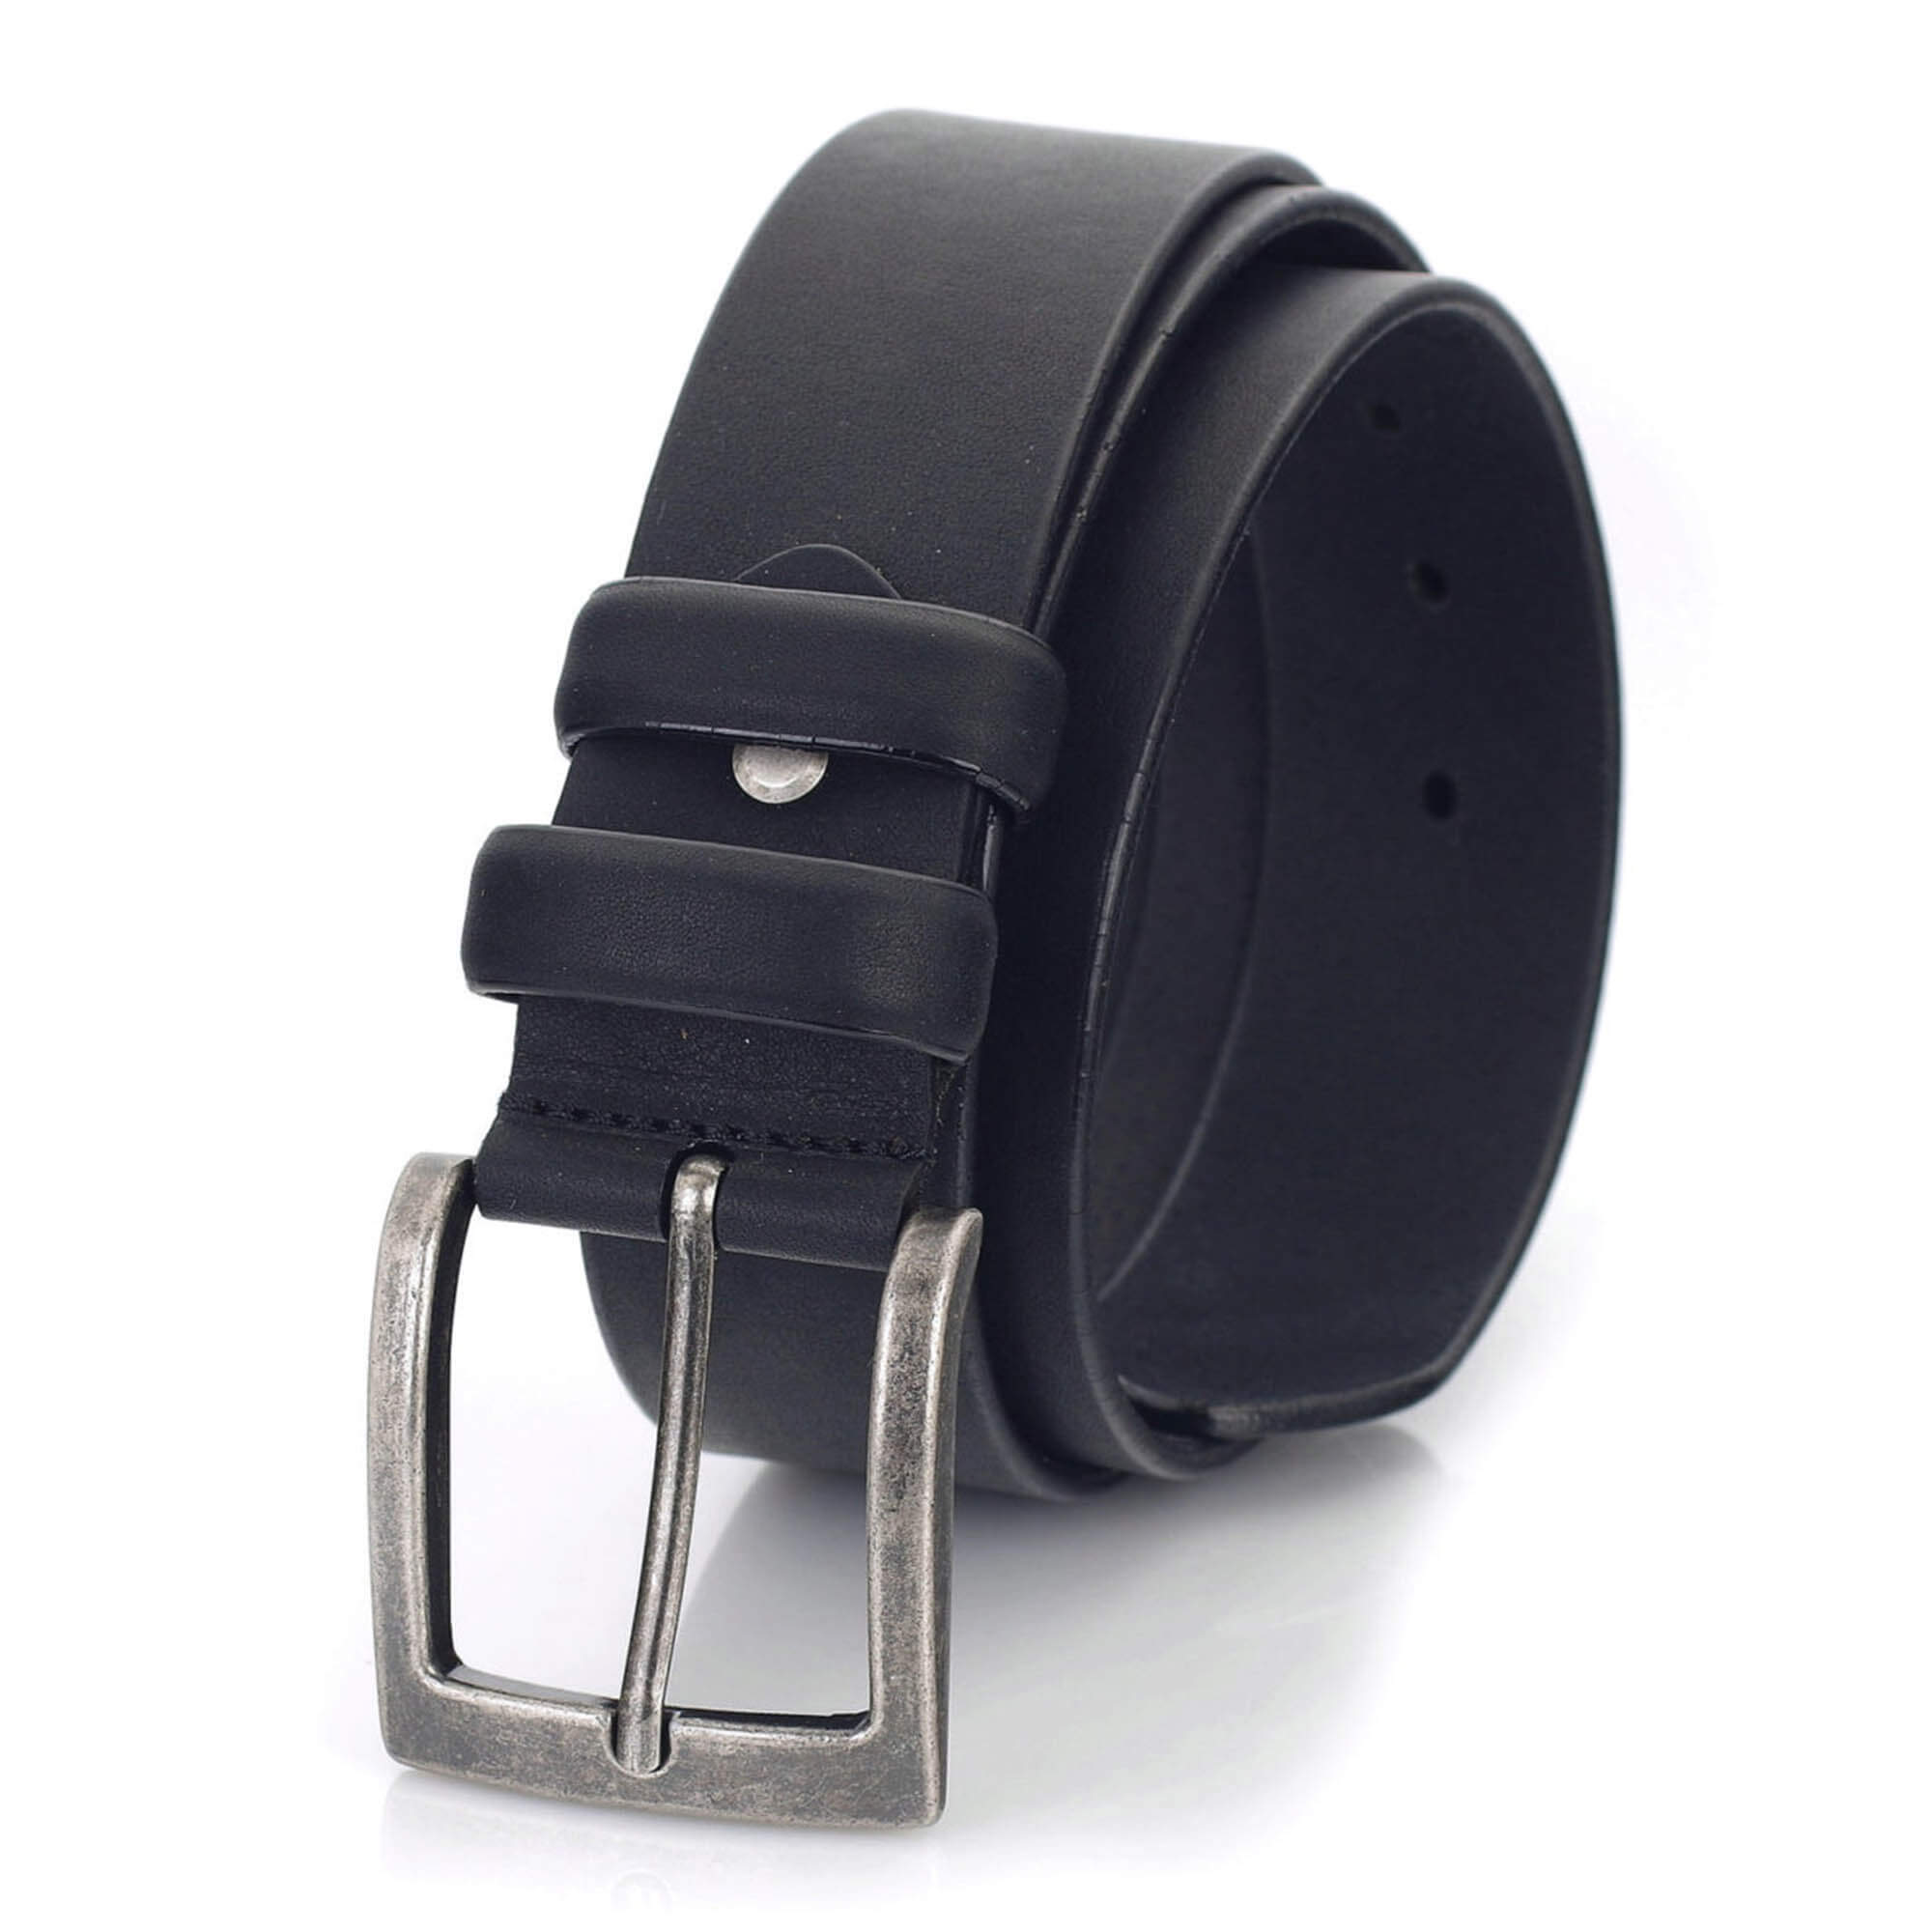 Buy Mens Belt For Black Jeans - Thick Wide Leather 1 1/2 Inch